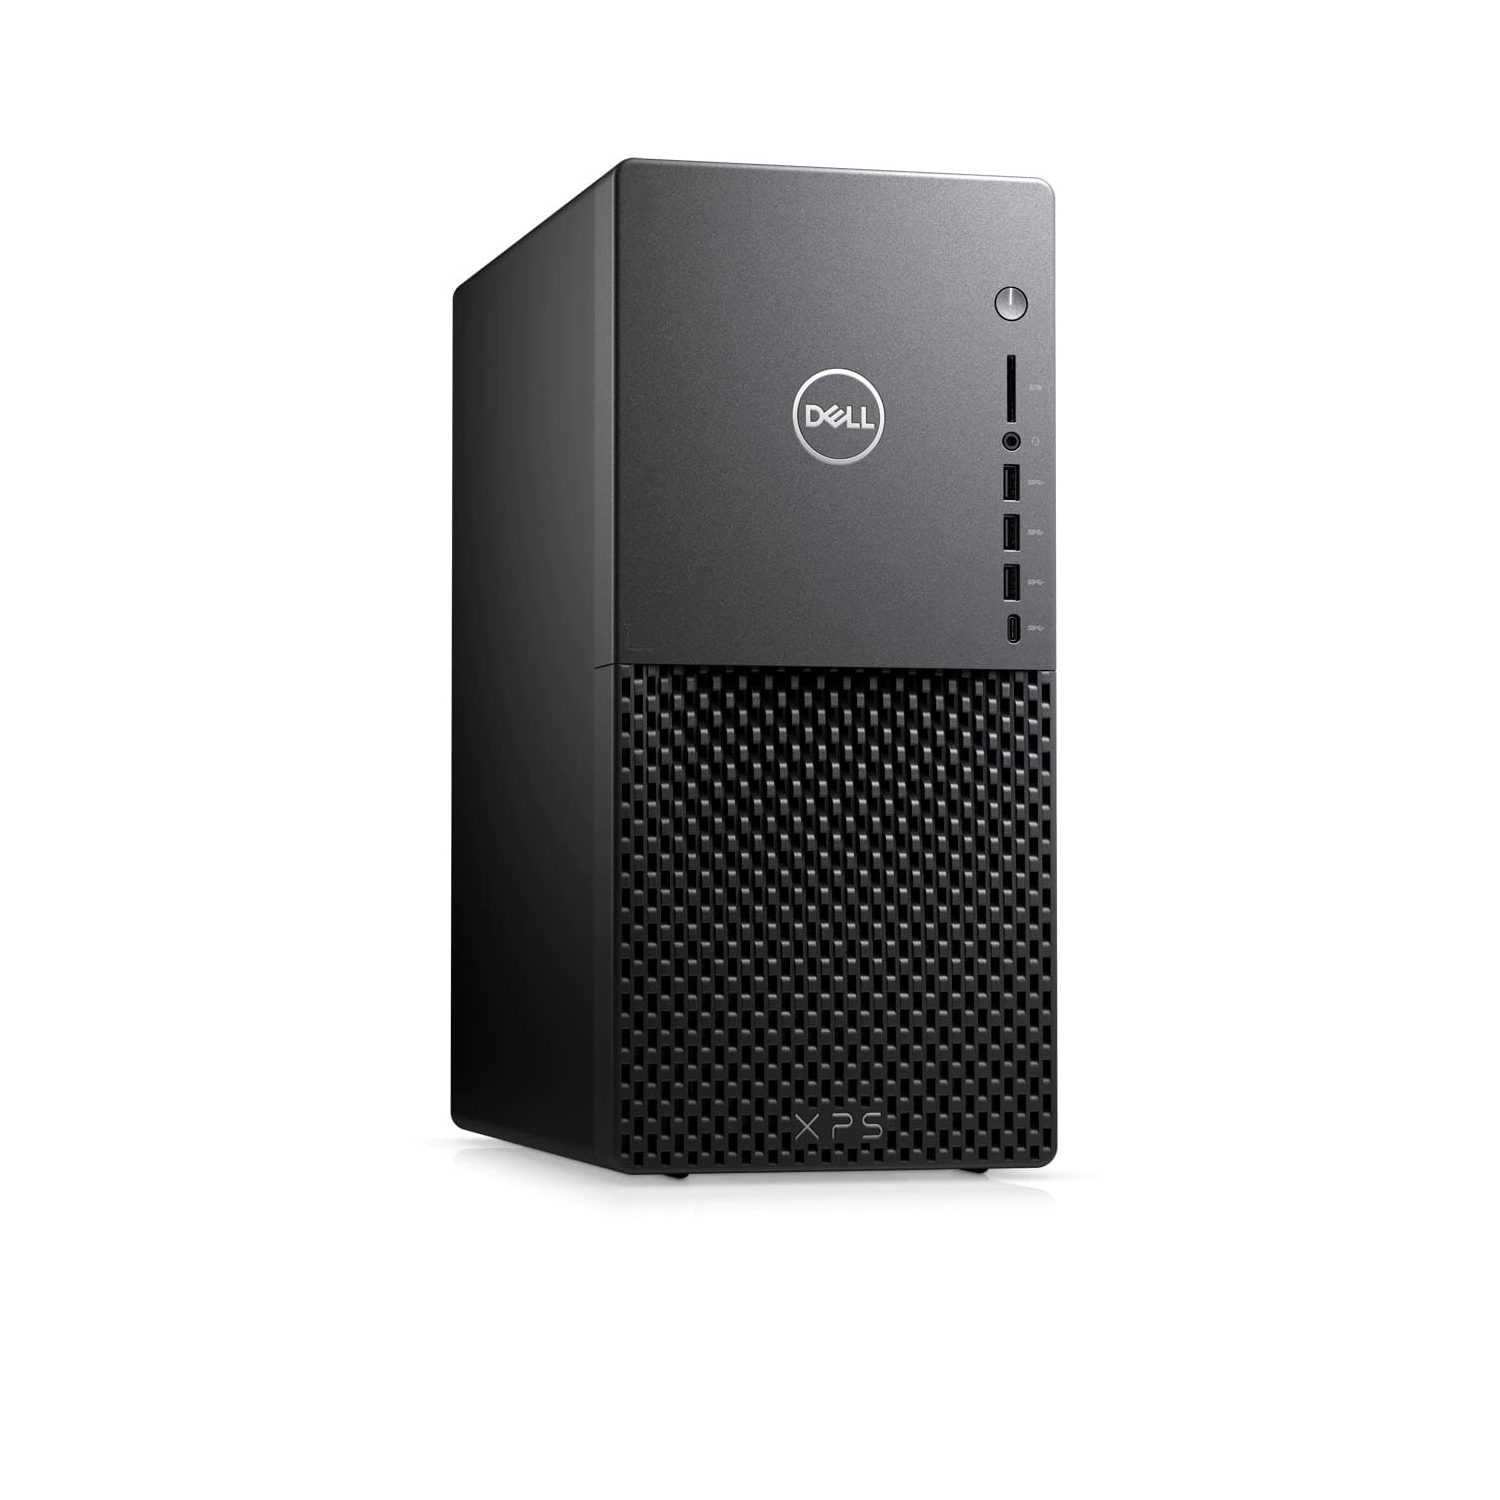 Refurbished (Excellent) - Dell XPS 8940 Desktop (2020) | Core i7 - 1TB HDD + 256GB SSD - 32GB RAM - 1660 Ti | 8 Cores @ 4.9 GHz - 11th Gen CPU Certified Refurbished